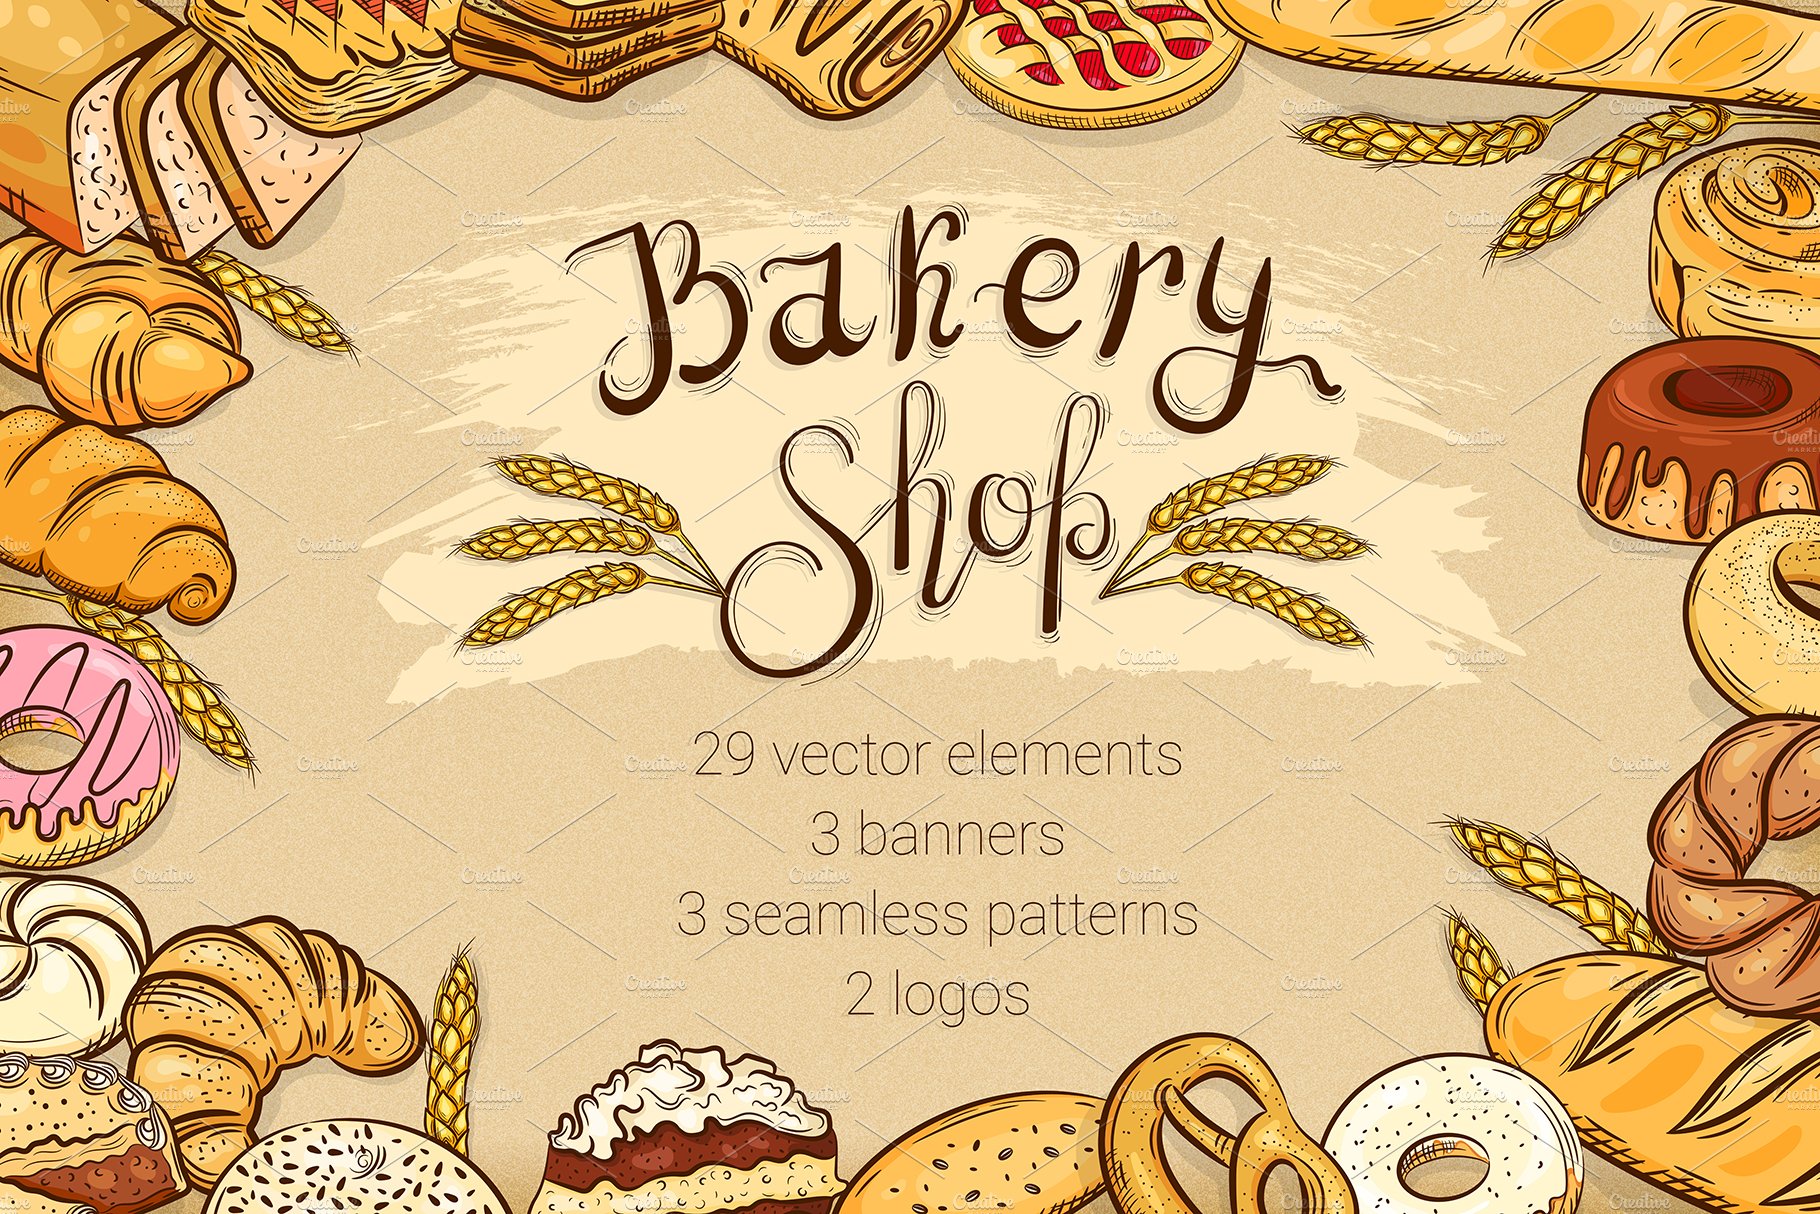 Bakery Shop cover image.